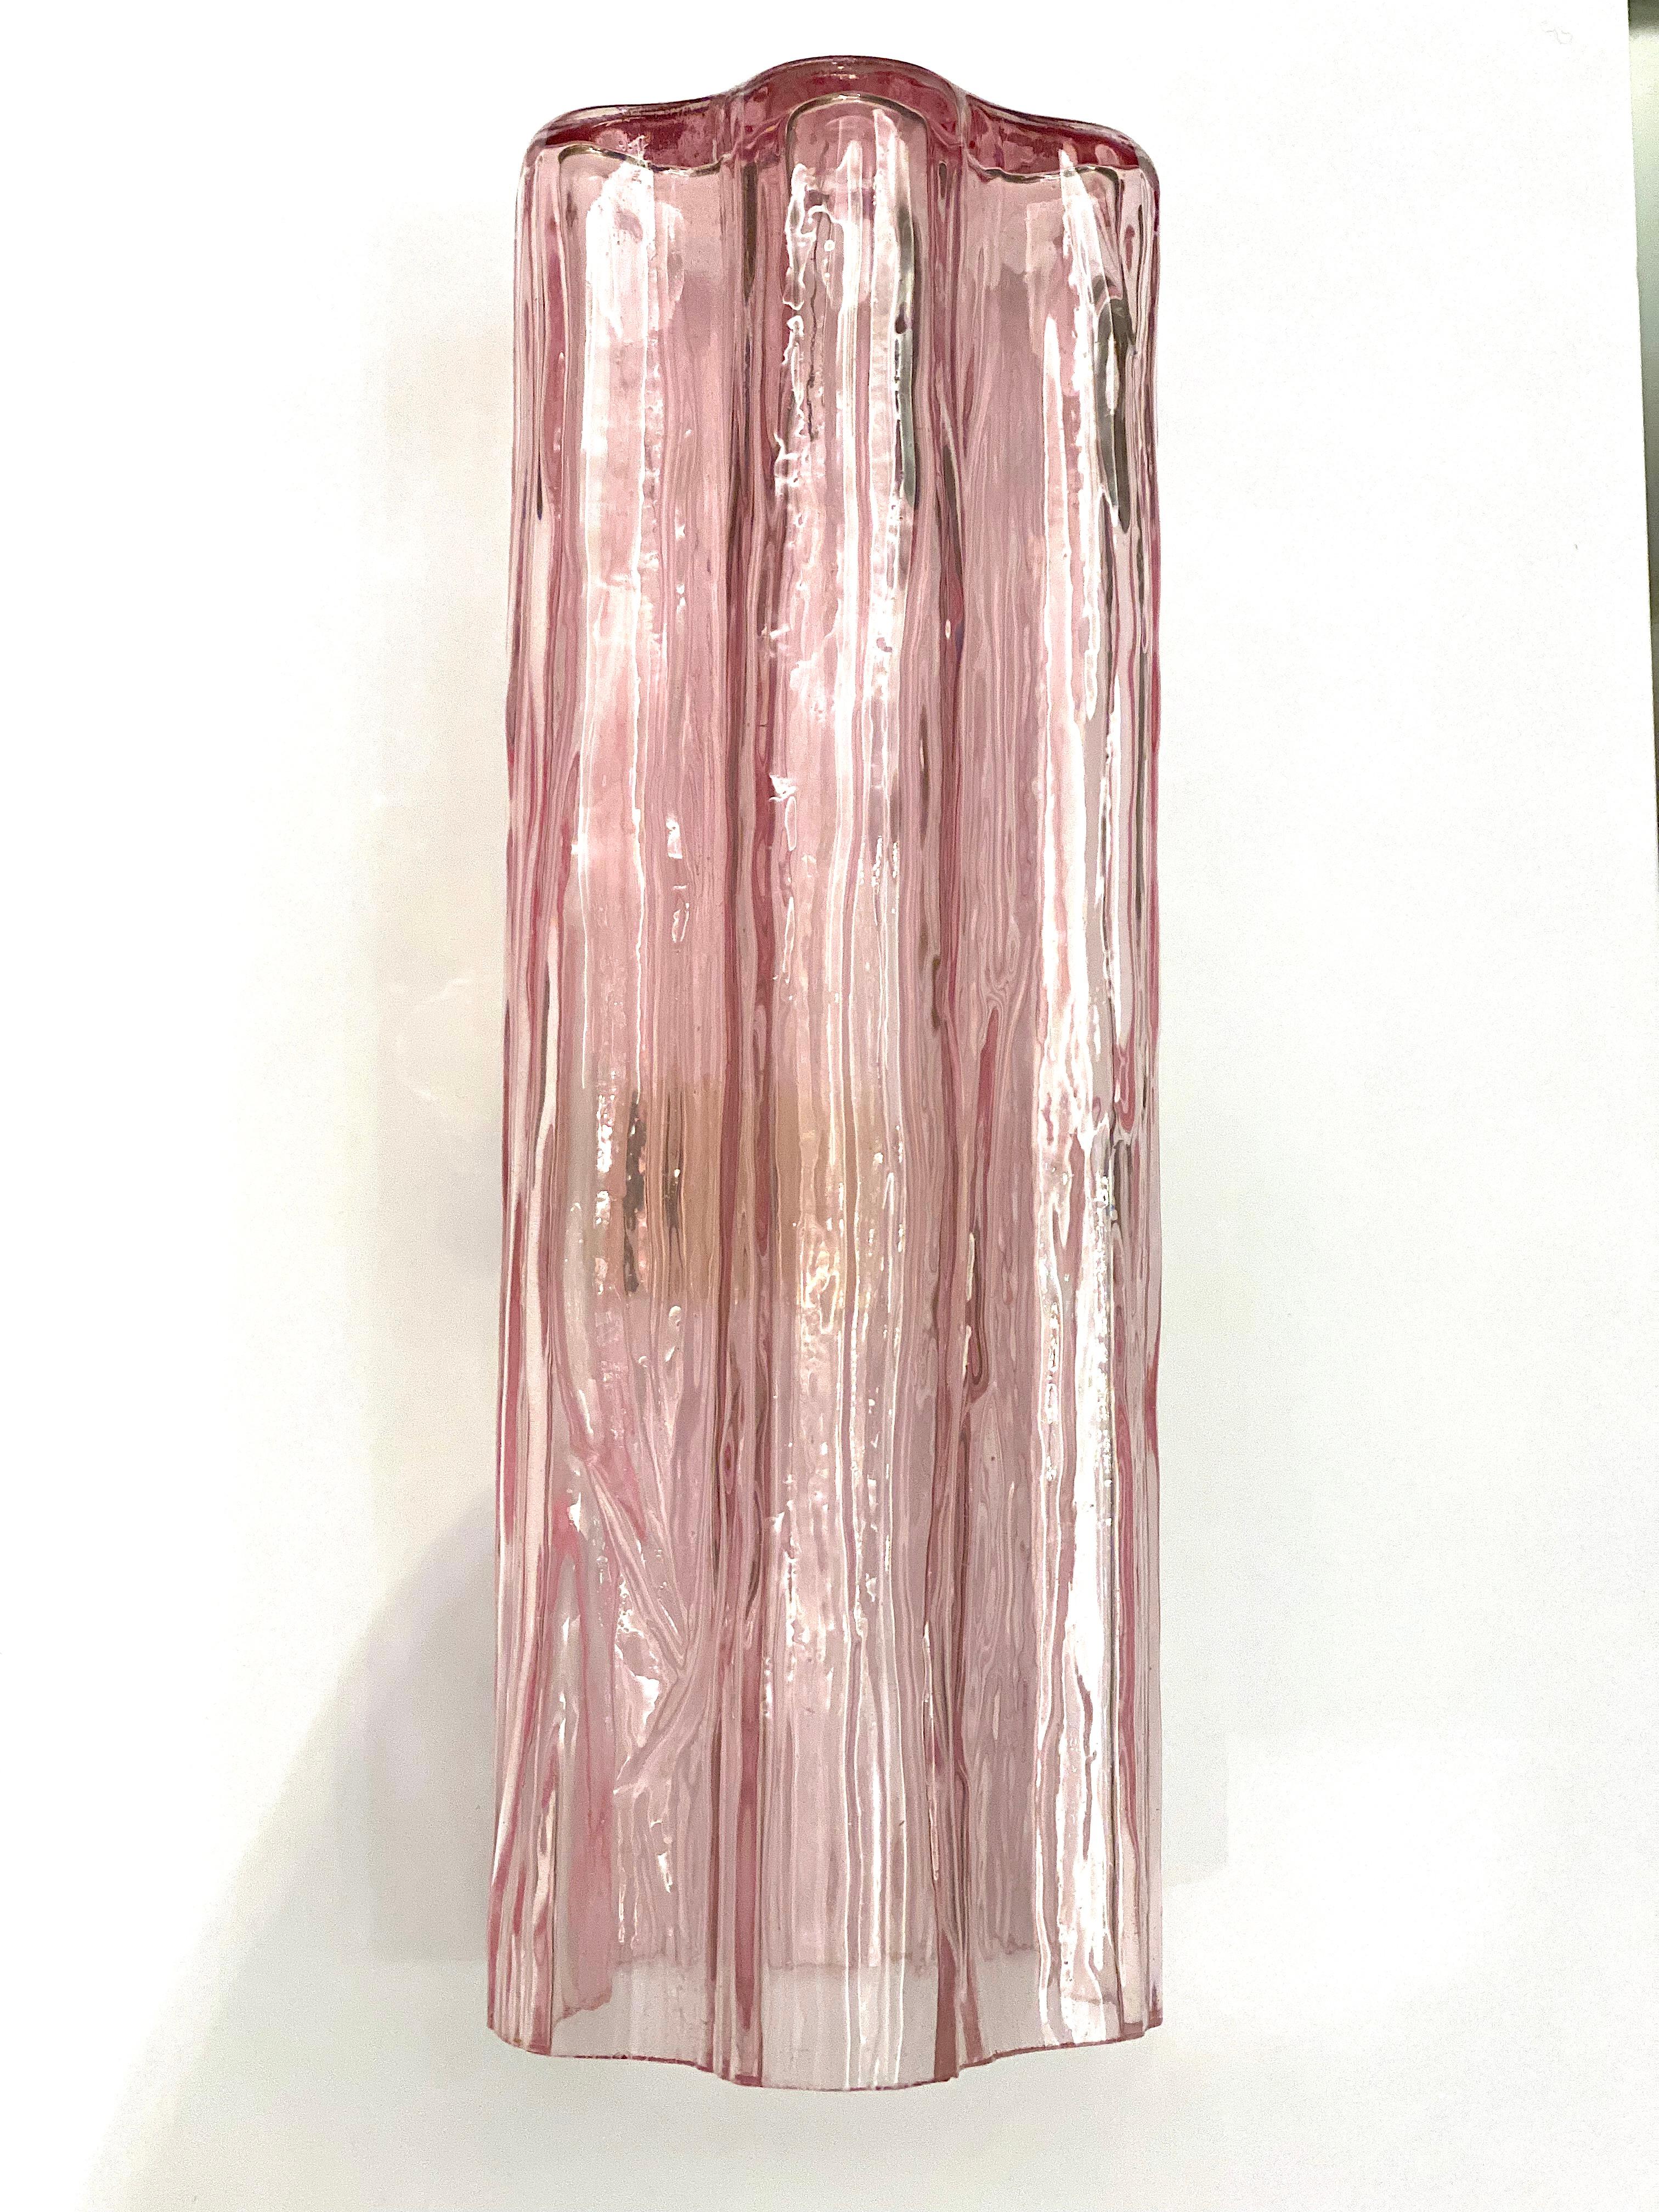 Contemporary Amazing Pink Tronchi Murano Glass Chandelier Italy For Sale